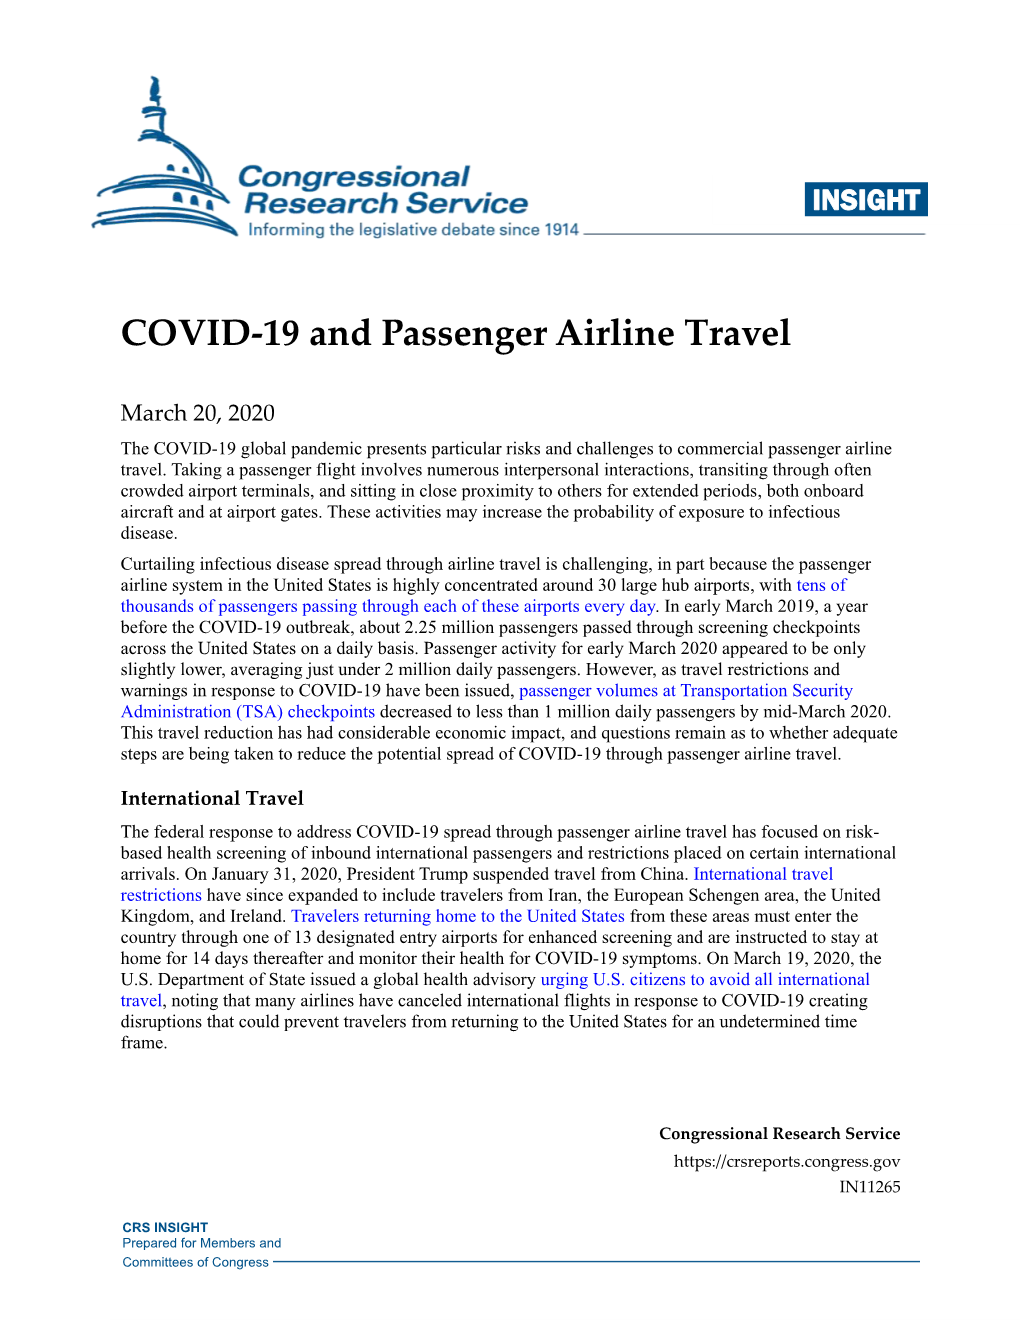 COVID-19 and Passenger Airline Travel